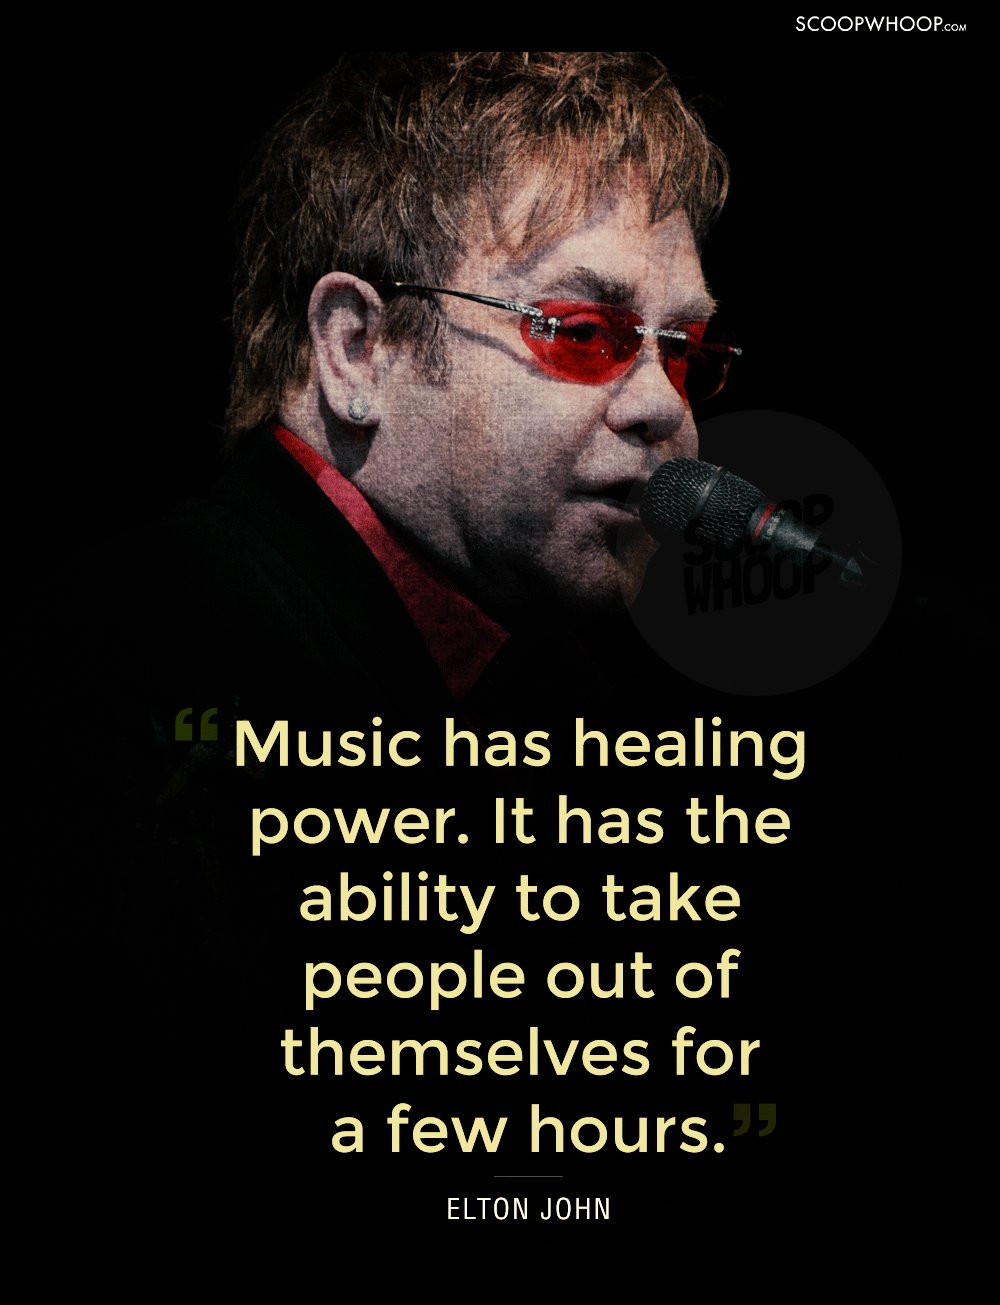 Inspirational Quotes Famous Musicians
 15 Profound Quotes By Famous Musicians About Work Love